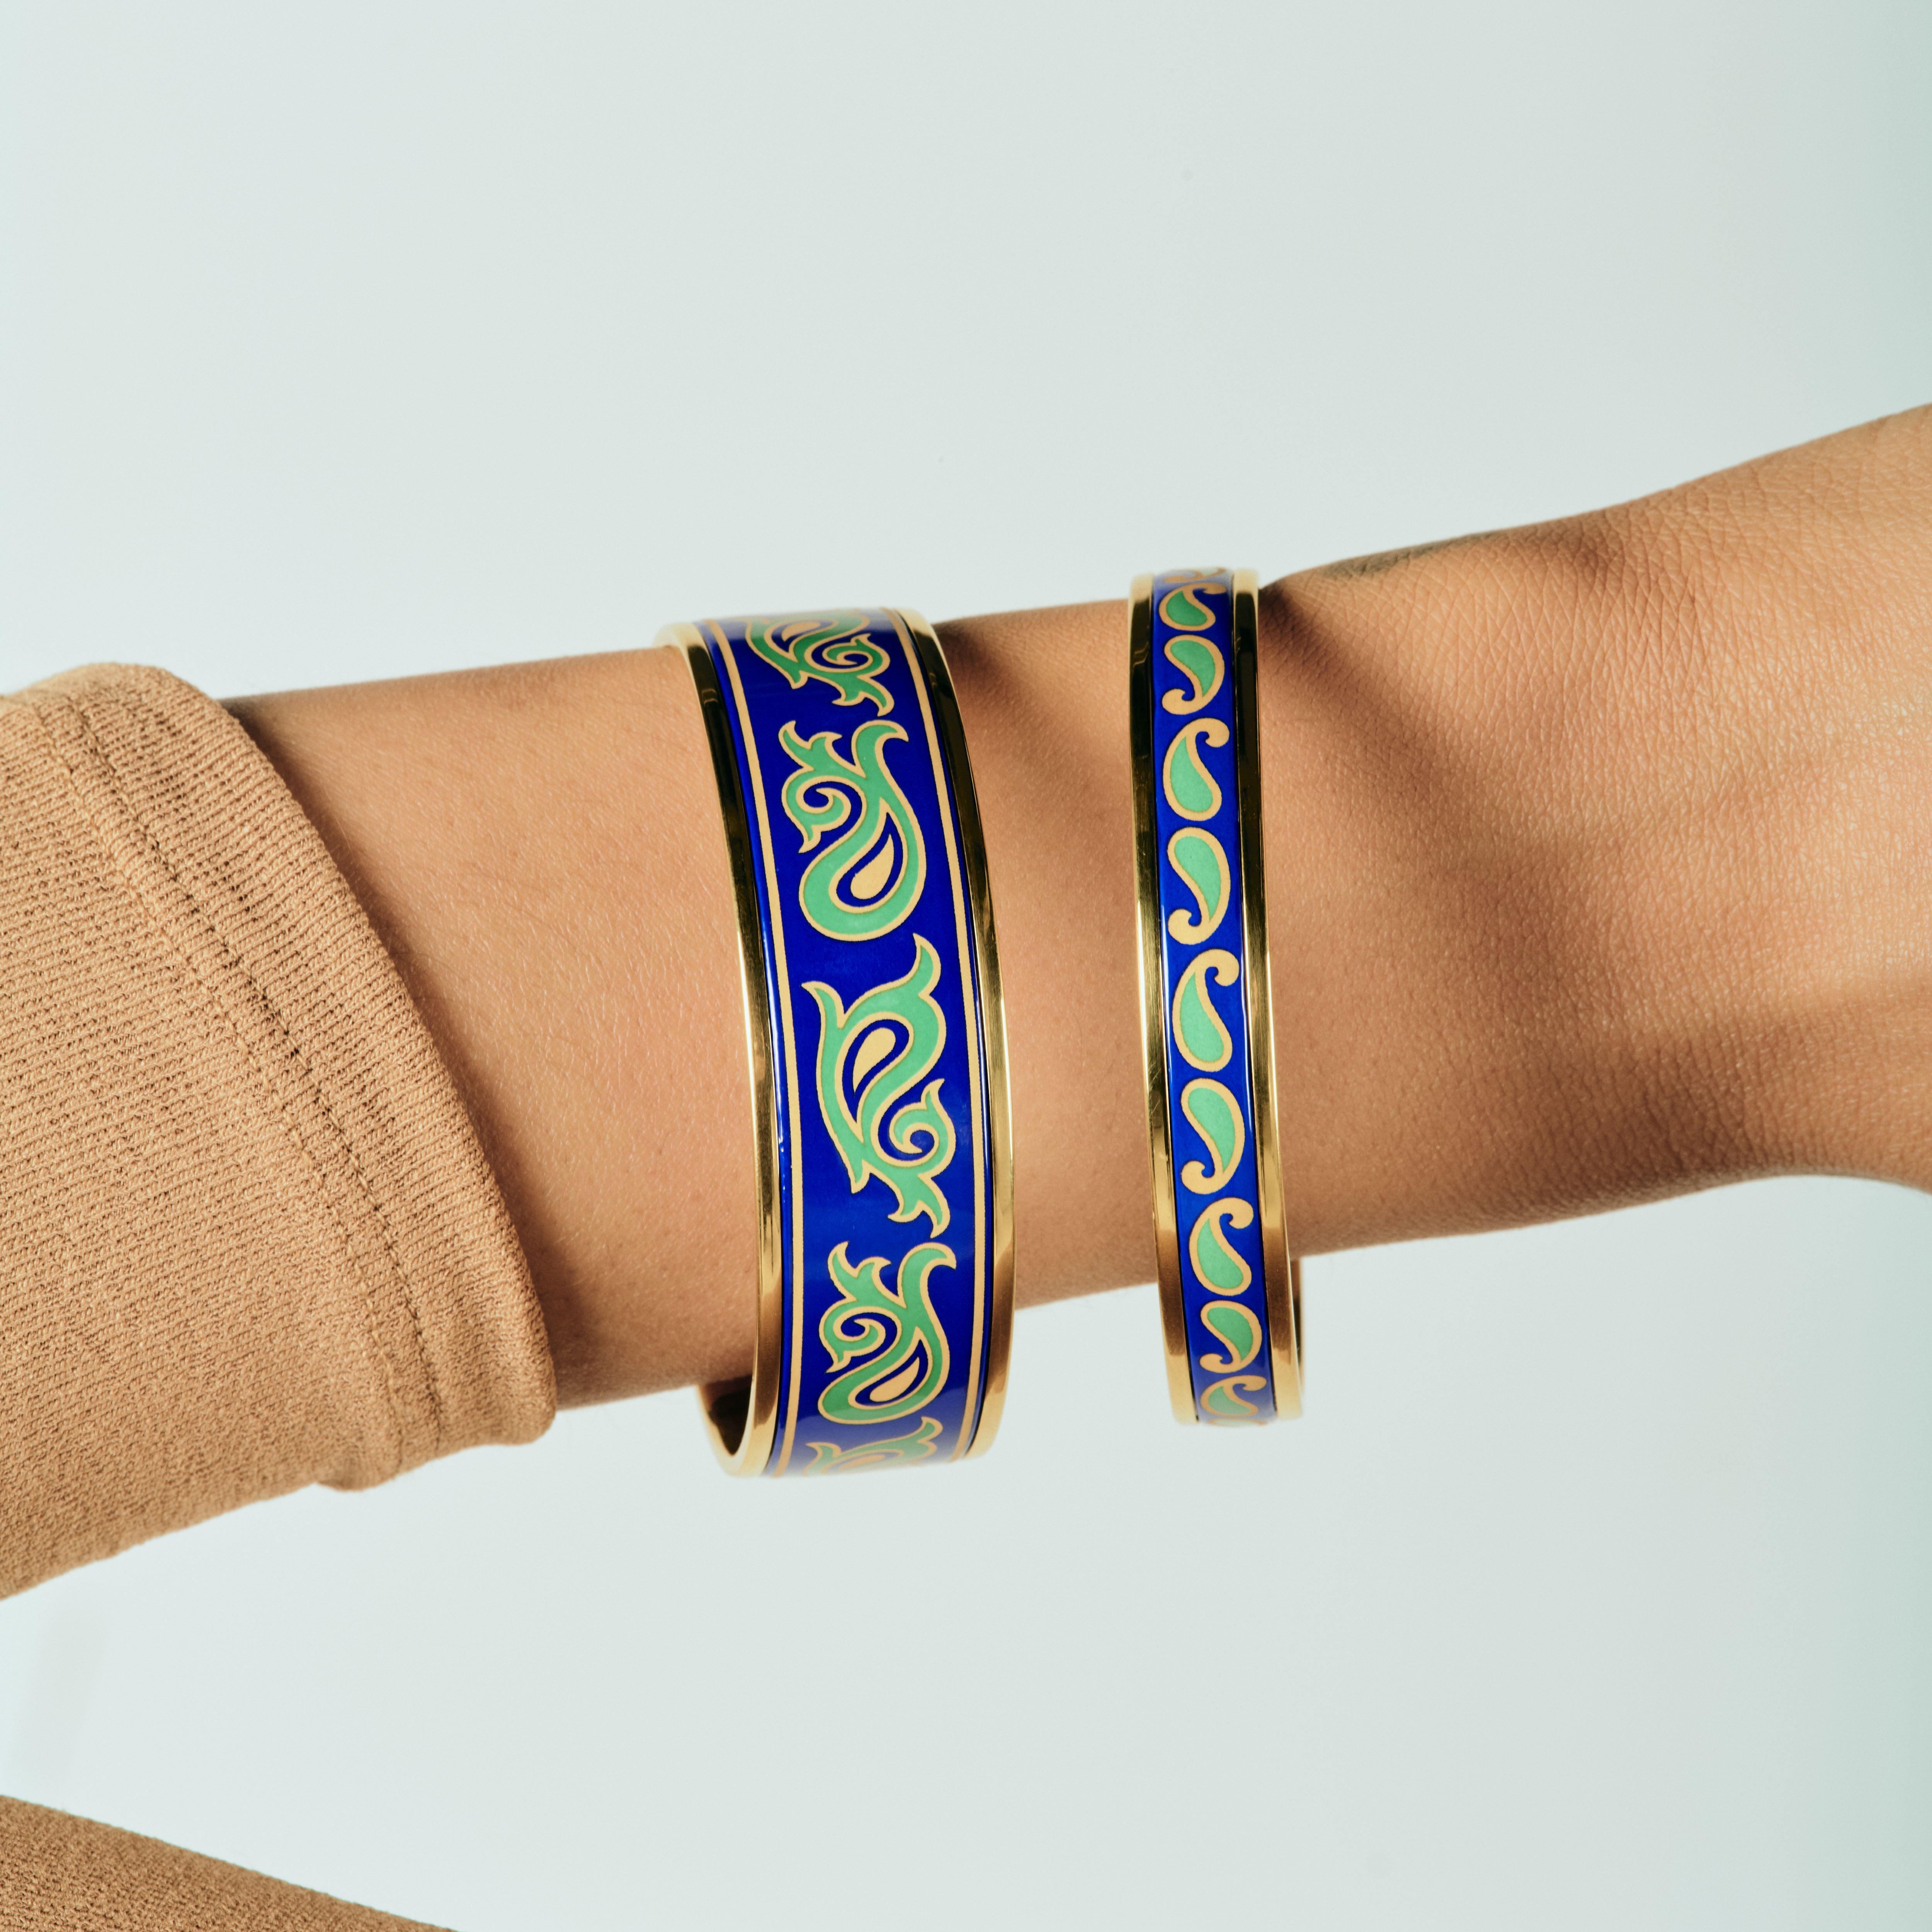 Introducing the Eternity Bangle. Elevate your style with our exquisite 18k gold-plated stainless steel bangle. Hand-painted with genuine fire enamel in vivid colors that will last forever, this luxurious piece is designed to make a statement.